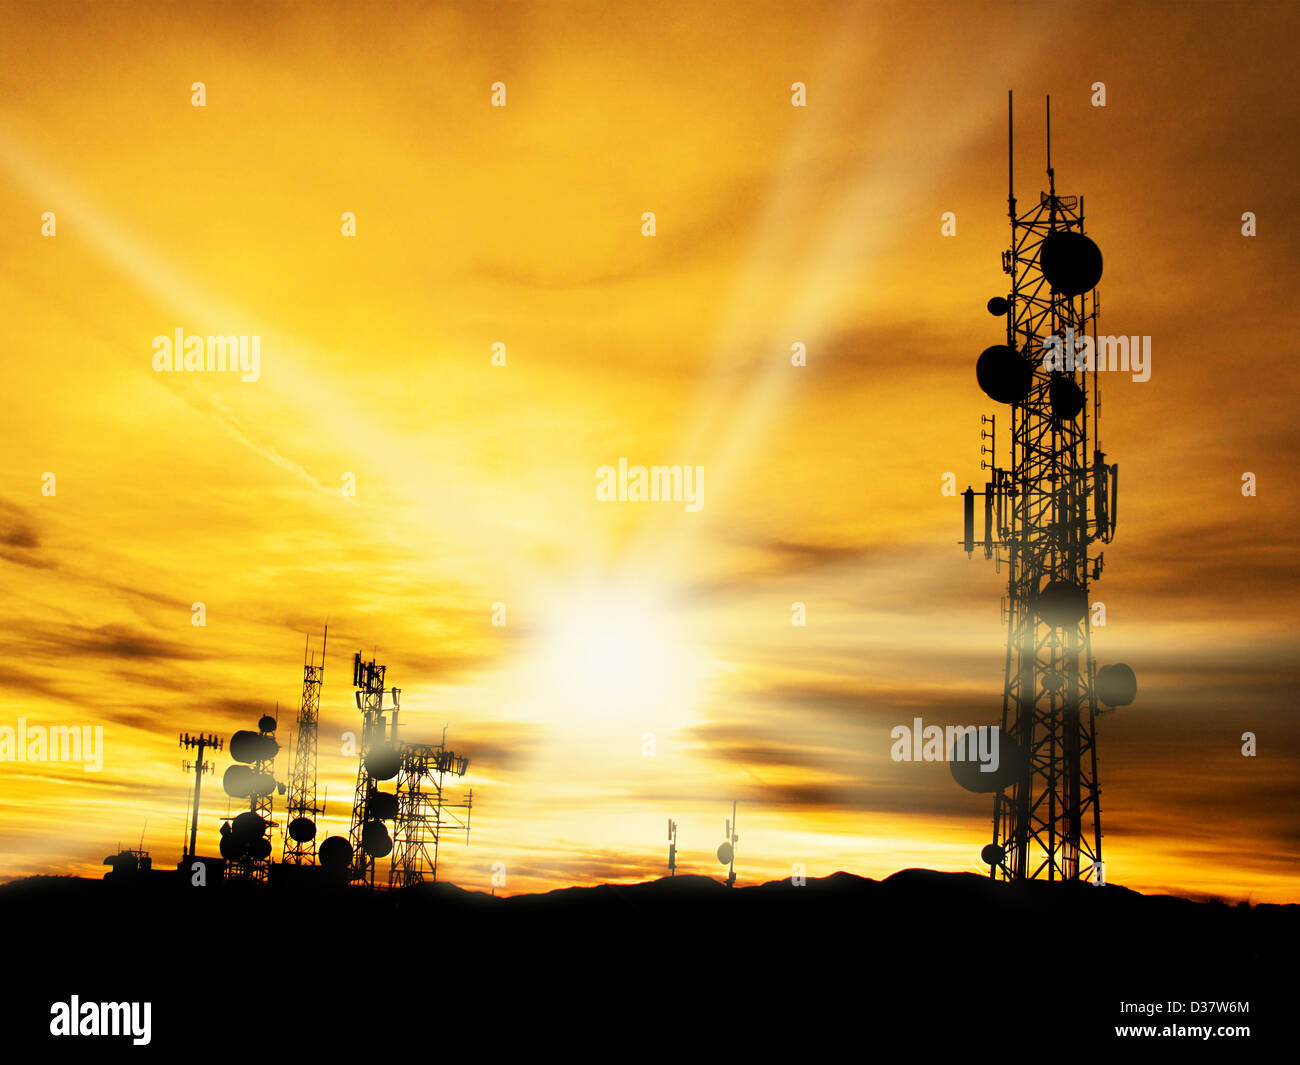 Several radio towers with sunset sky in background Stock Photo